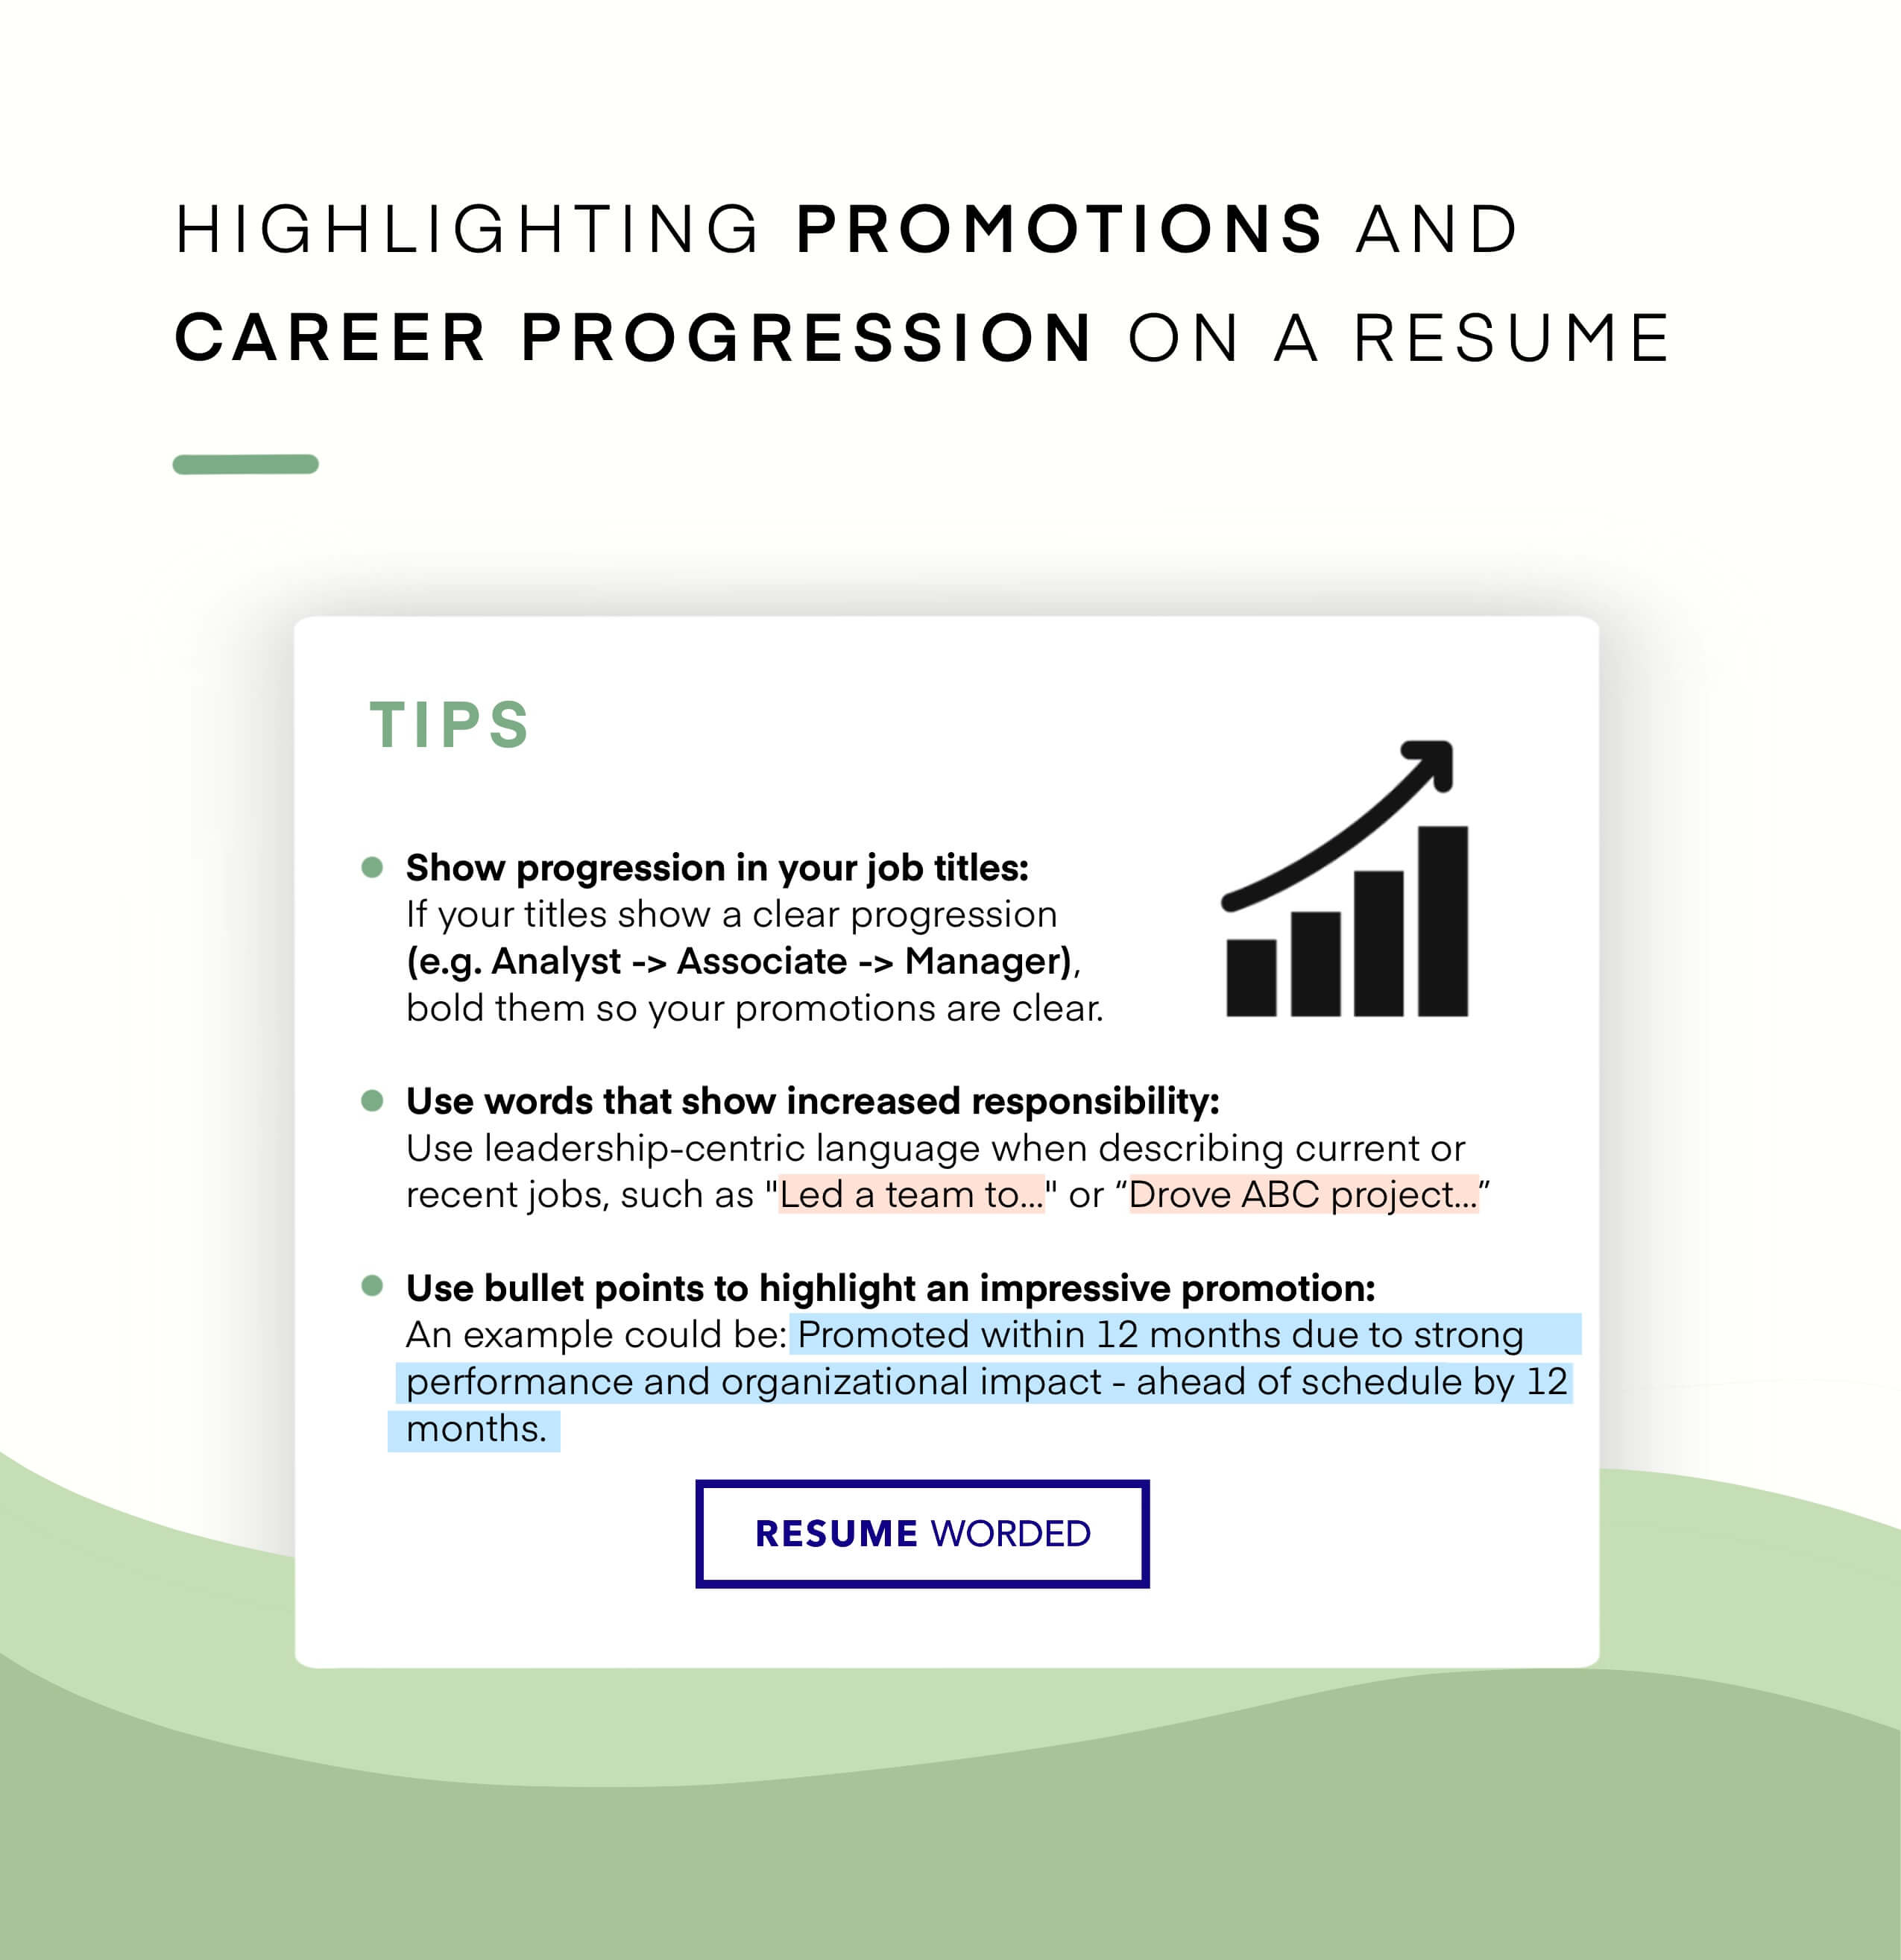 Show career progression in accounting and auditing. - Revenue Auditor Resume